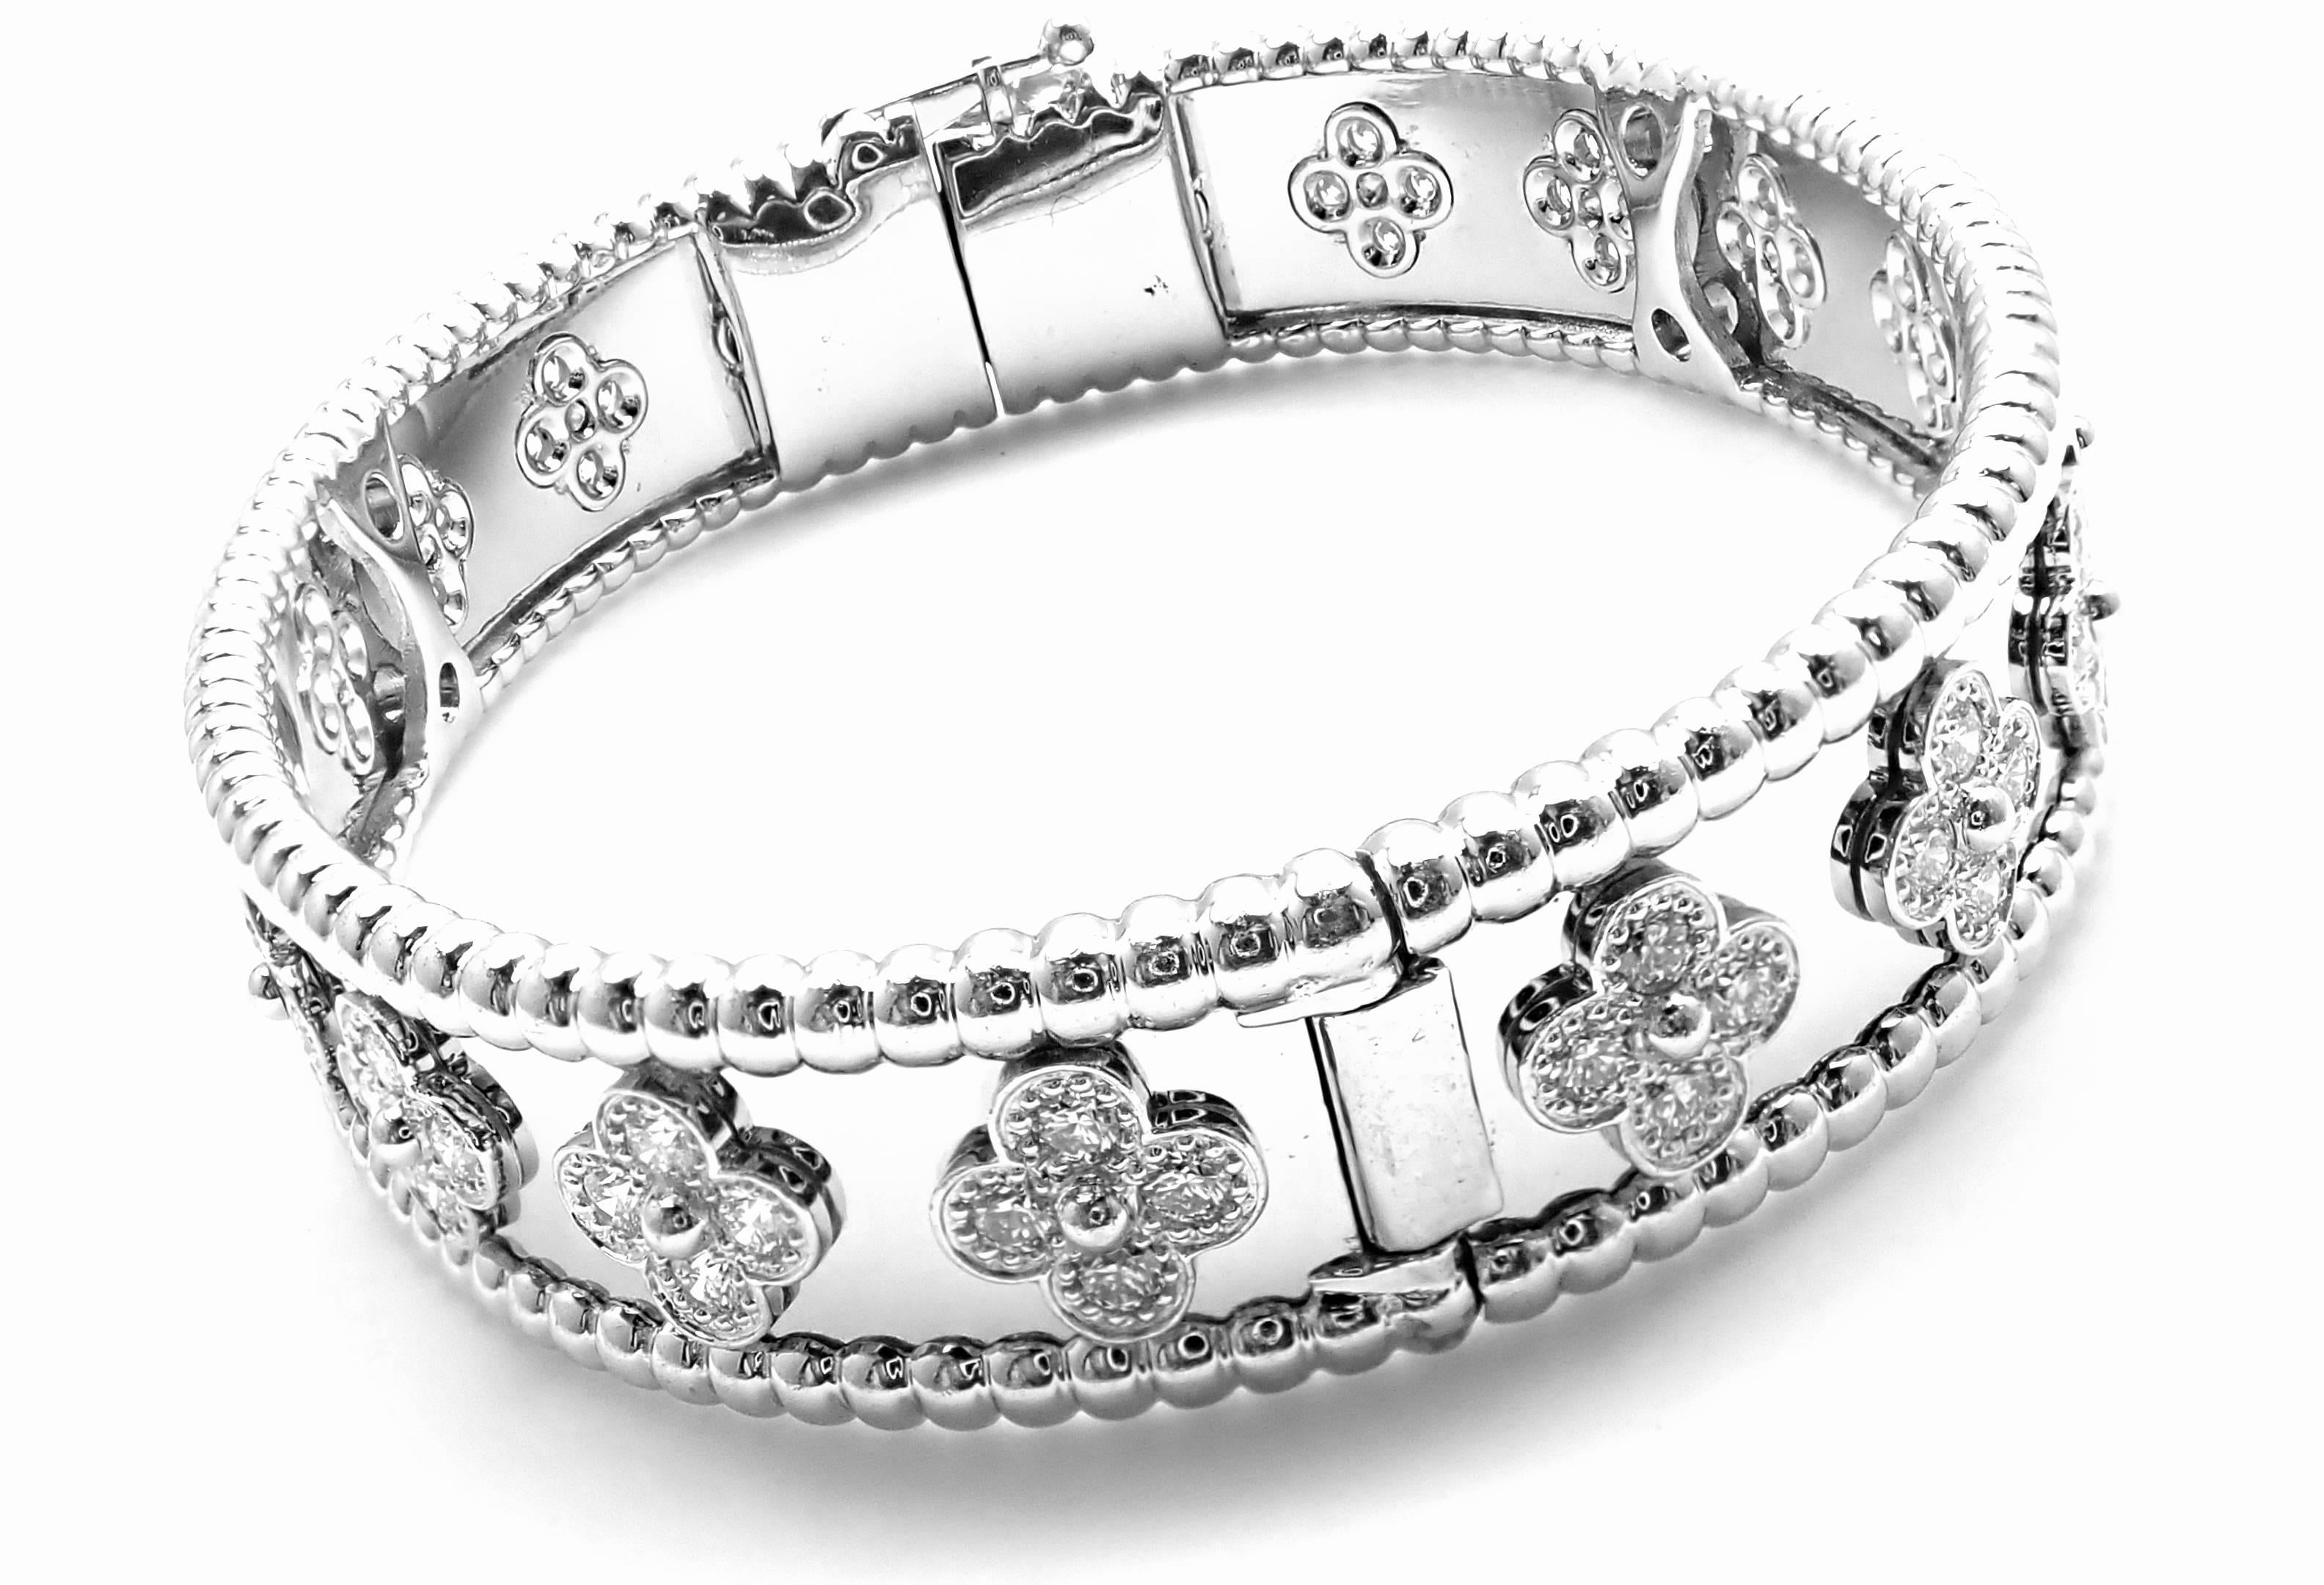 18k White Gold Diamond Clover Perlee Bangle Bracelet by Van Cleef & Arpels. 
With 72 brilliant round cut diamond VVS1 clarity, E color
Total weight approx. 1.60ct
This bracelet comes with Van Cleef & Arpels service paper from VCA store in Japan and